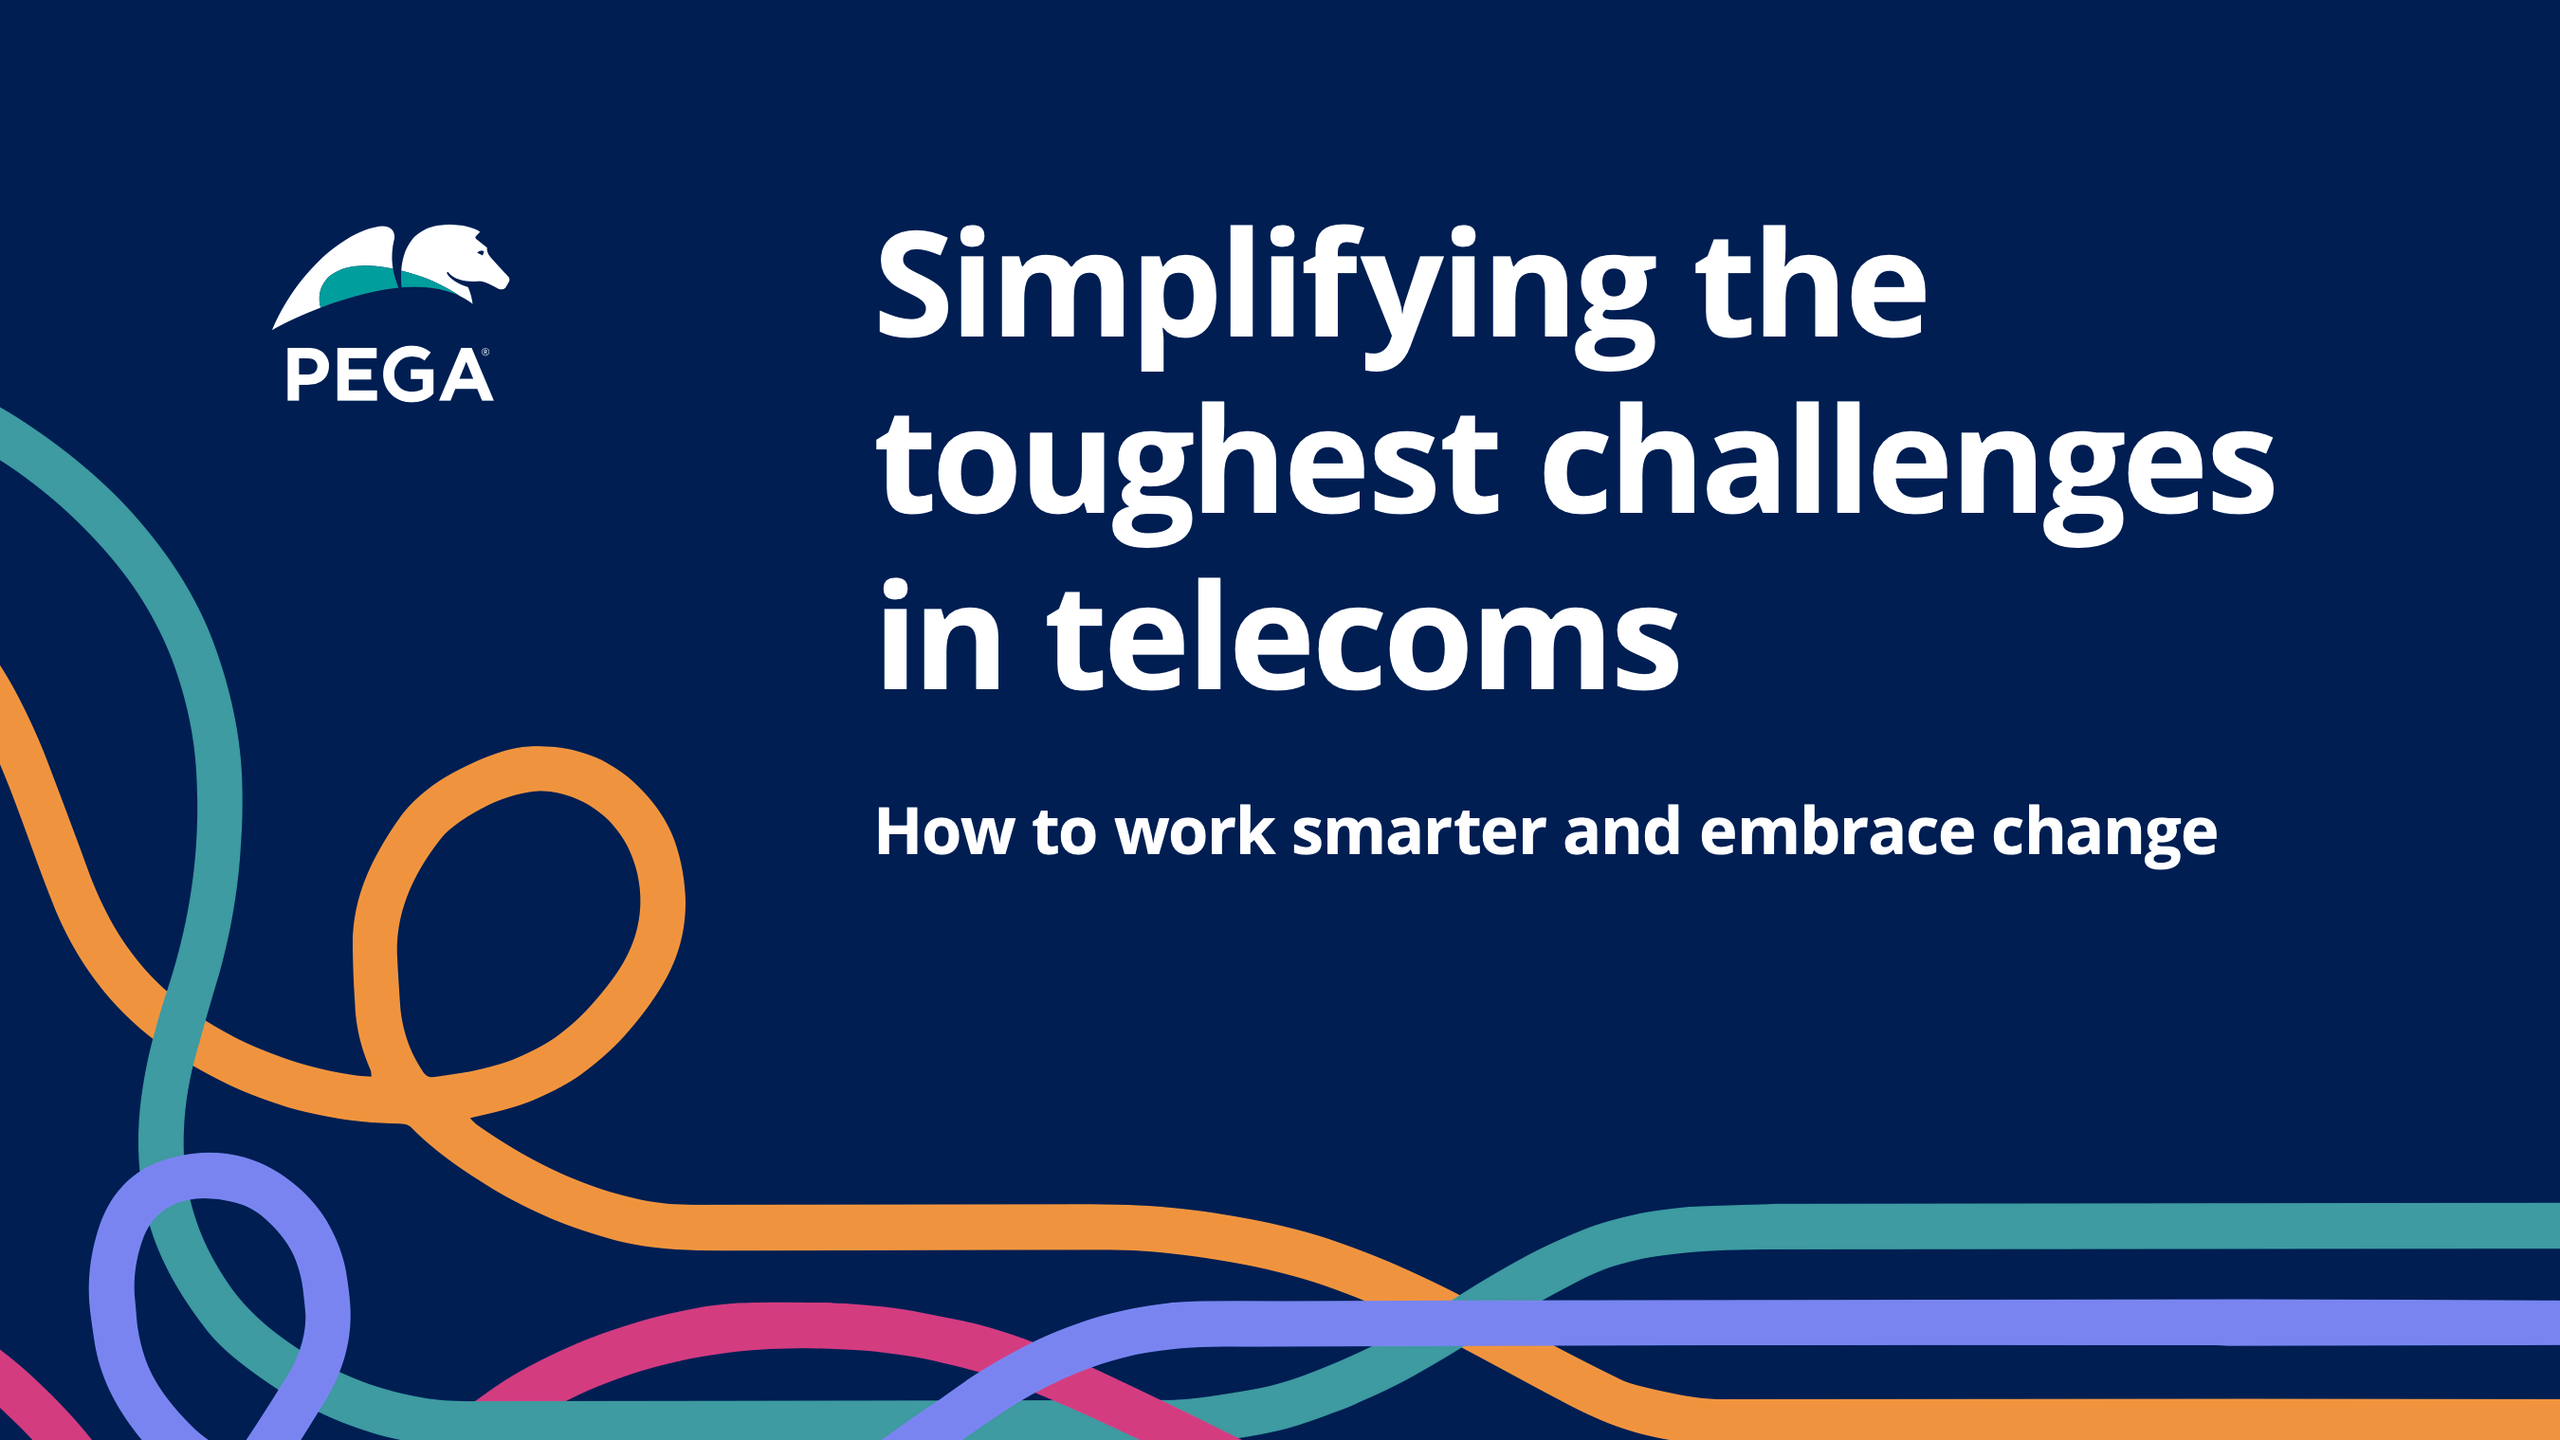 Simplifying the toughest challenges in telecoms